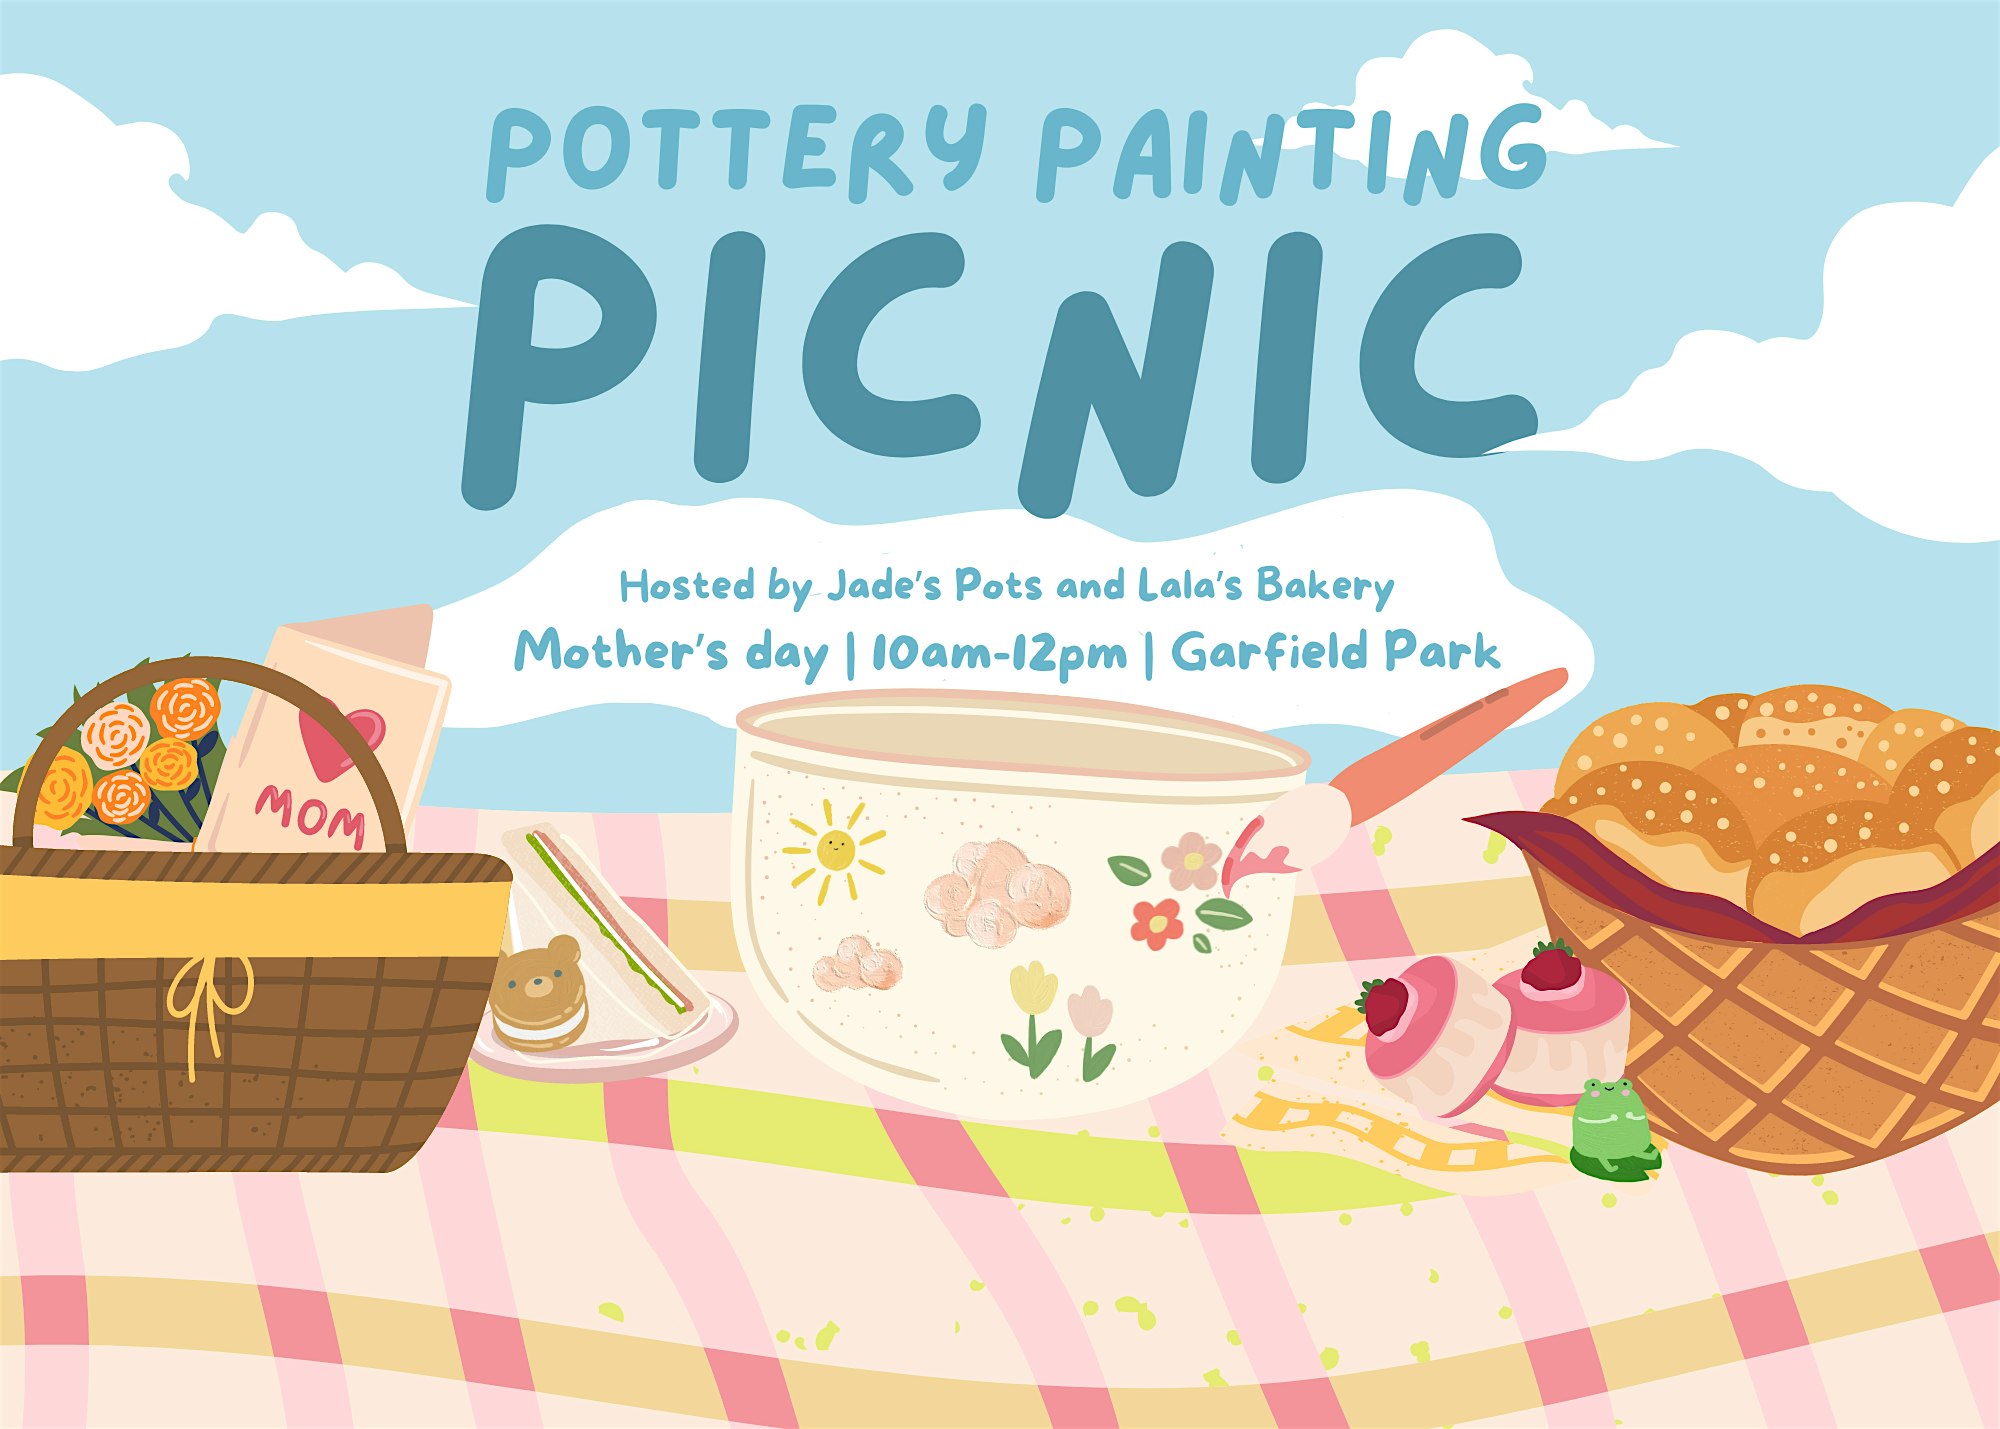 Mother's Day Pottery Painting Picnic